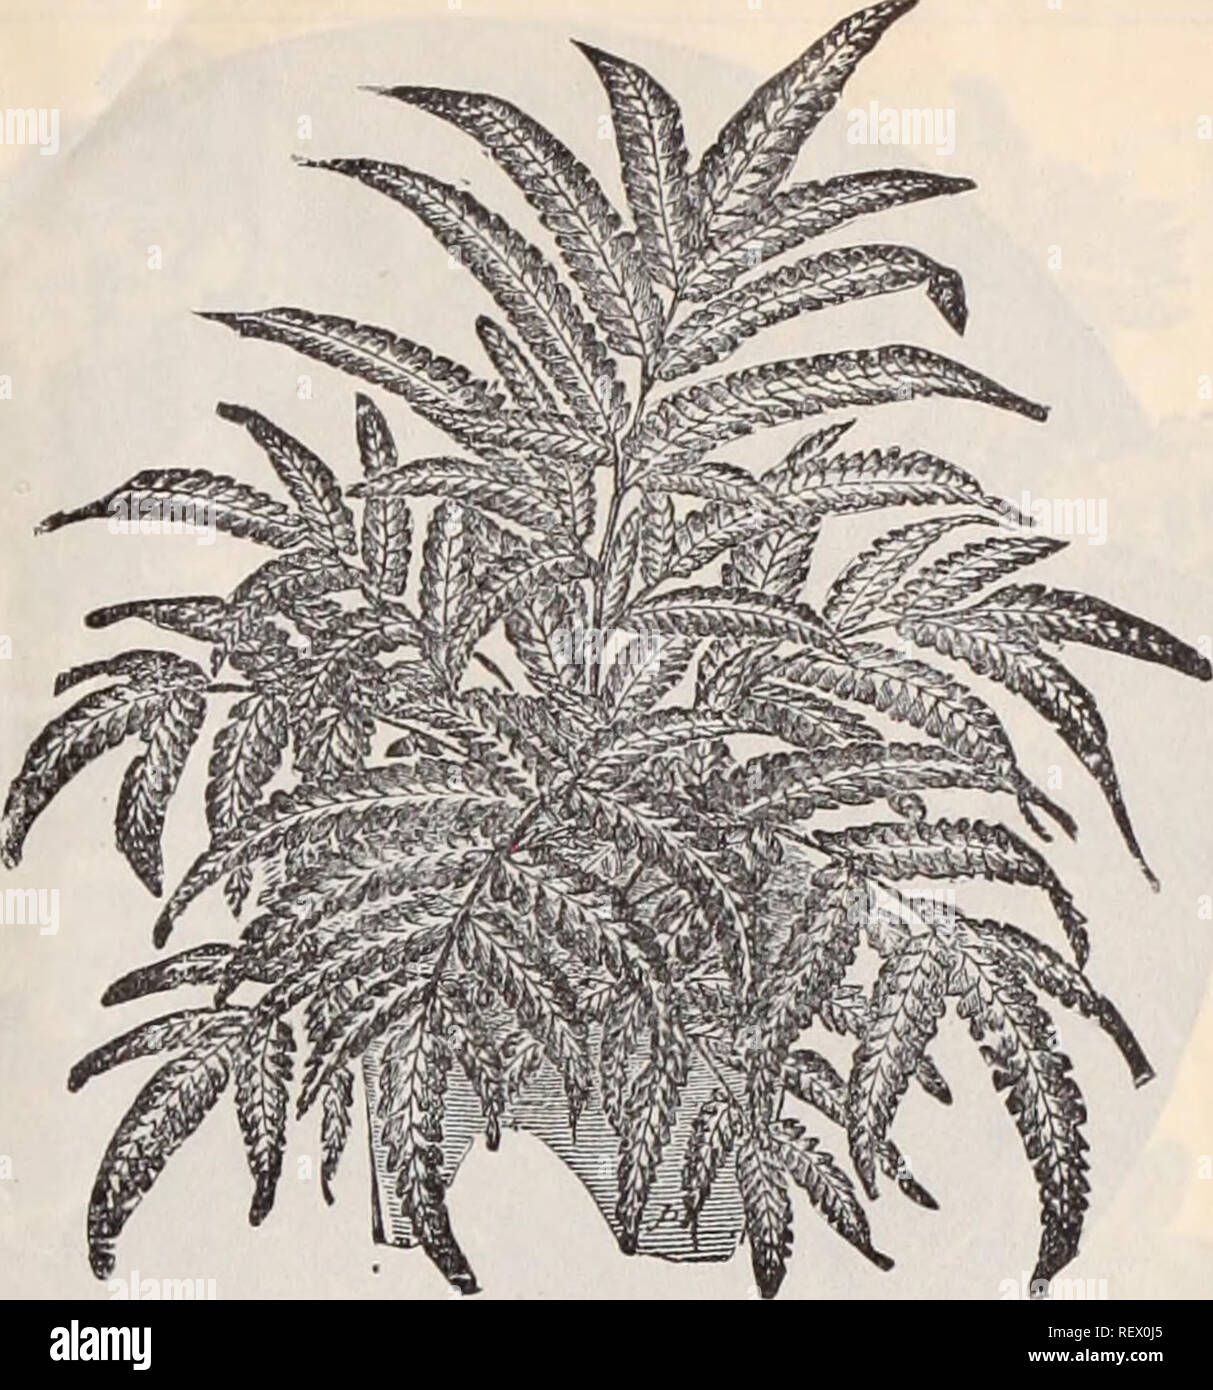 . Dreer's wholesale price list / Henry A. Dreer.. Nursery Catalogue. Platycbkium Stbmmaria (Stag-horn Fern.) Platycerium Alcicorne. (Elks-Horn Fern.) This variety is seen more commonly than any of the Platyceriums, but is still comparatively scarce, and a most interesting, species. 35, 50 and 75 cents each.. La.strea Aristata Variegat.. Platycerinm Stemmaria or IBtliiopica. {&quot; Stag-horn Fern.&quot;) This is a noble-looking Fern. The barren I'onds are very broad, and the fertile ones, which are usually produced in pairs, are divided into two broad lobes and these again terminate in two ob Stock Photo